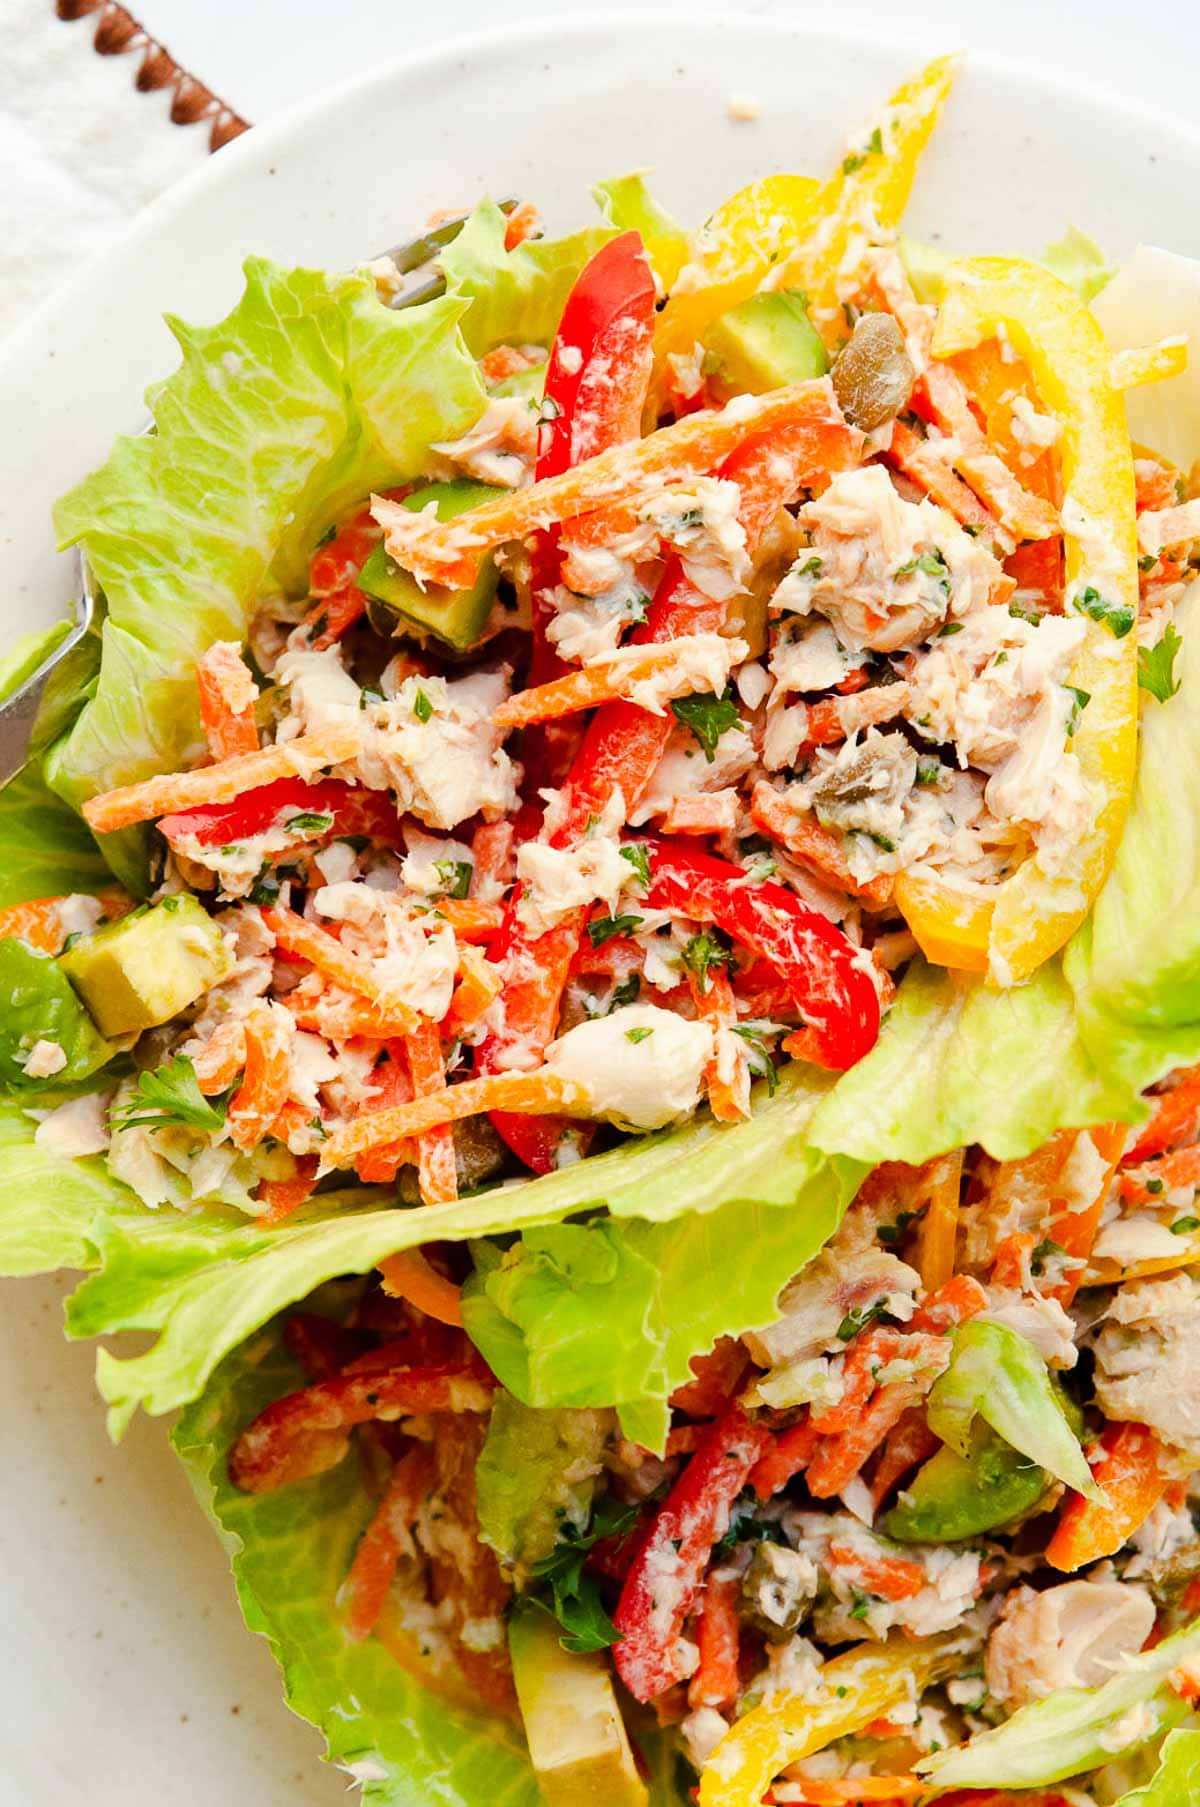 Canned salmon salad in lettuce leaves cups.